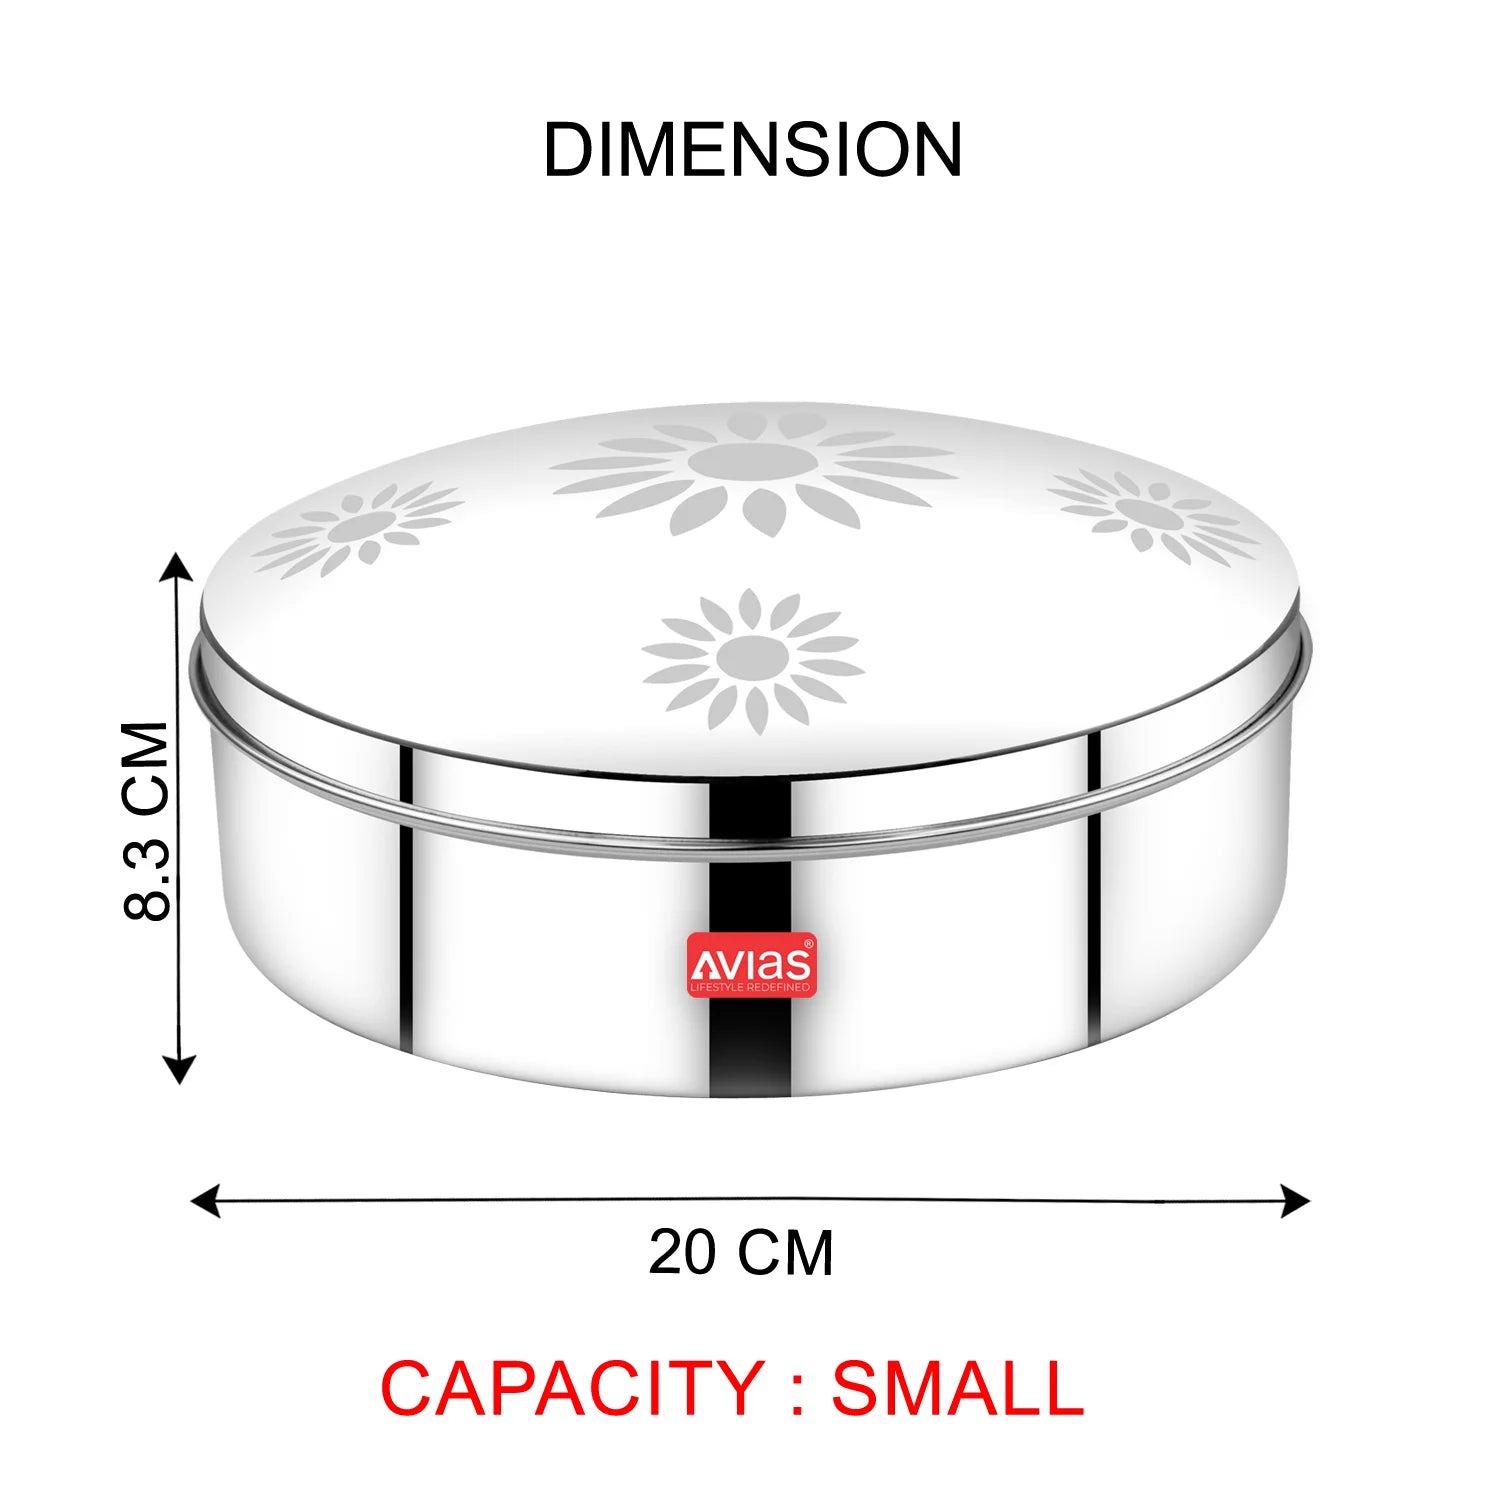 AVIAS Dome stainless steel spice box small